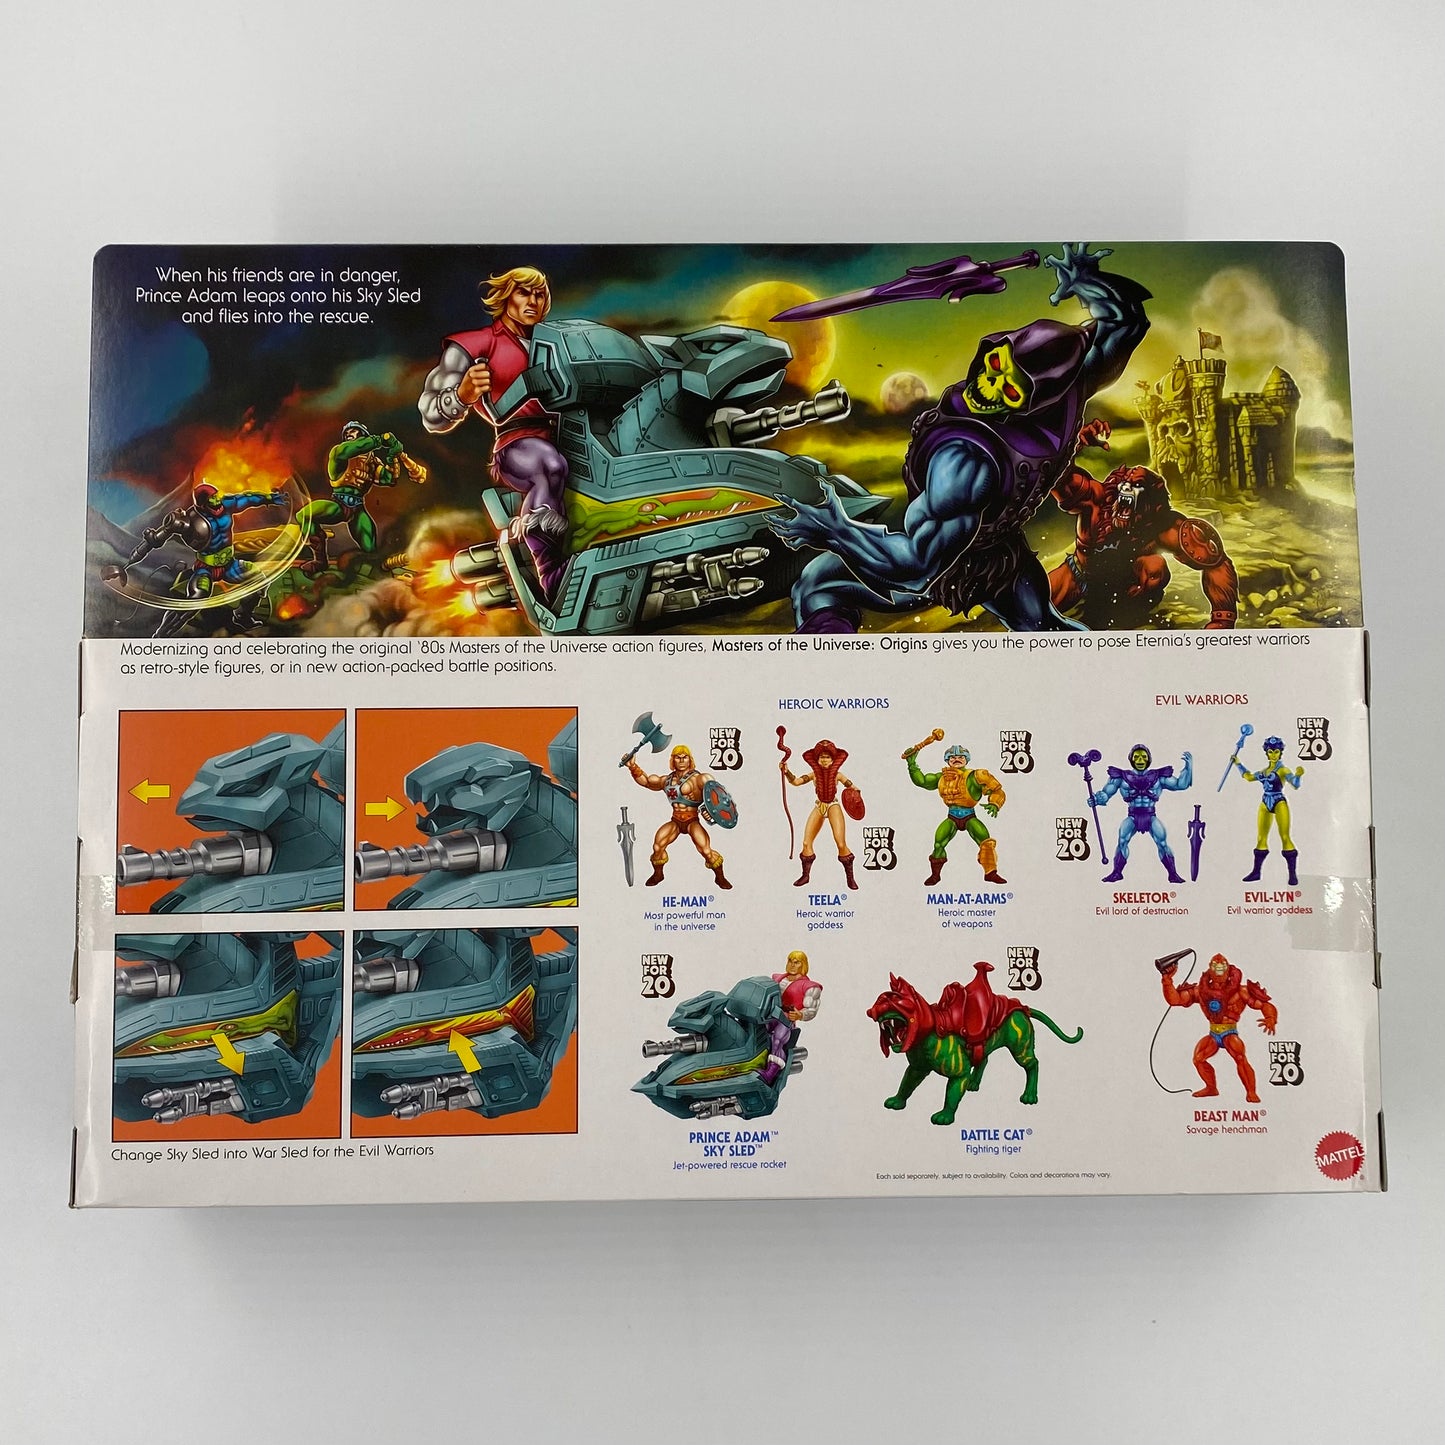 Masters of the Universe Origins Prince Adam Sky Sled boxed 5.5” action figure & vehicle (2020) Mattel